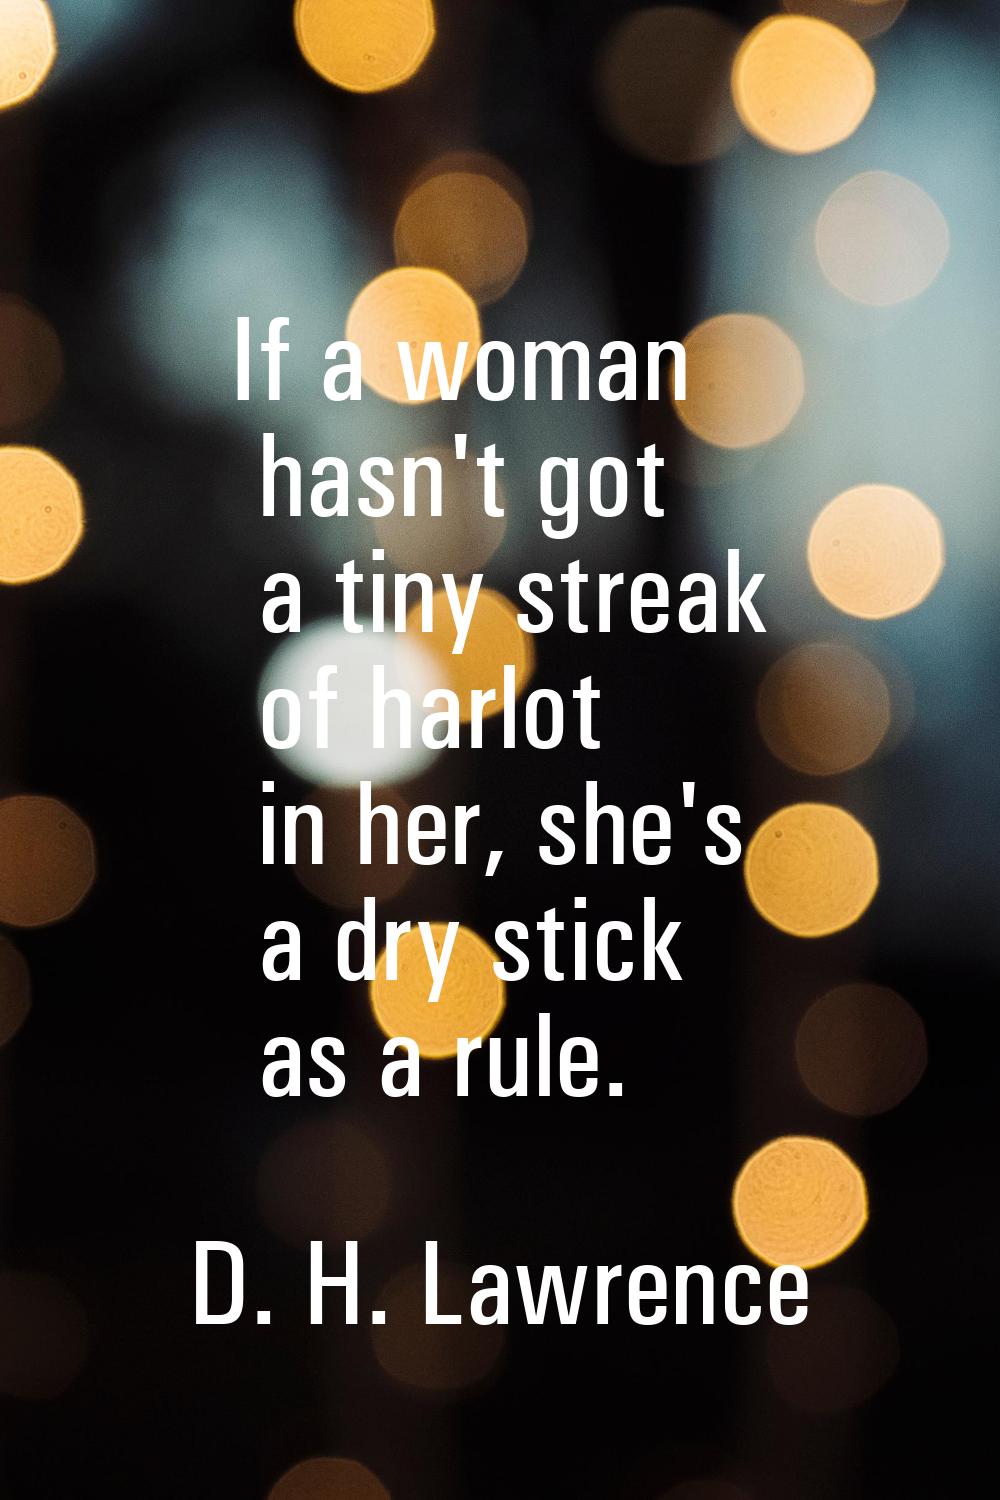 If a woman hasn't got a tiny streak of harlot in her, she's a dry stick as a rule.